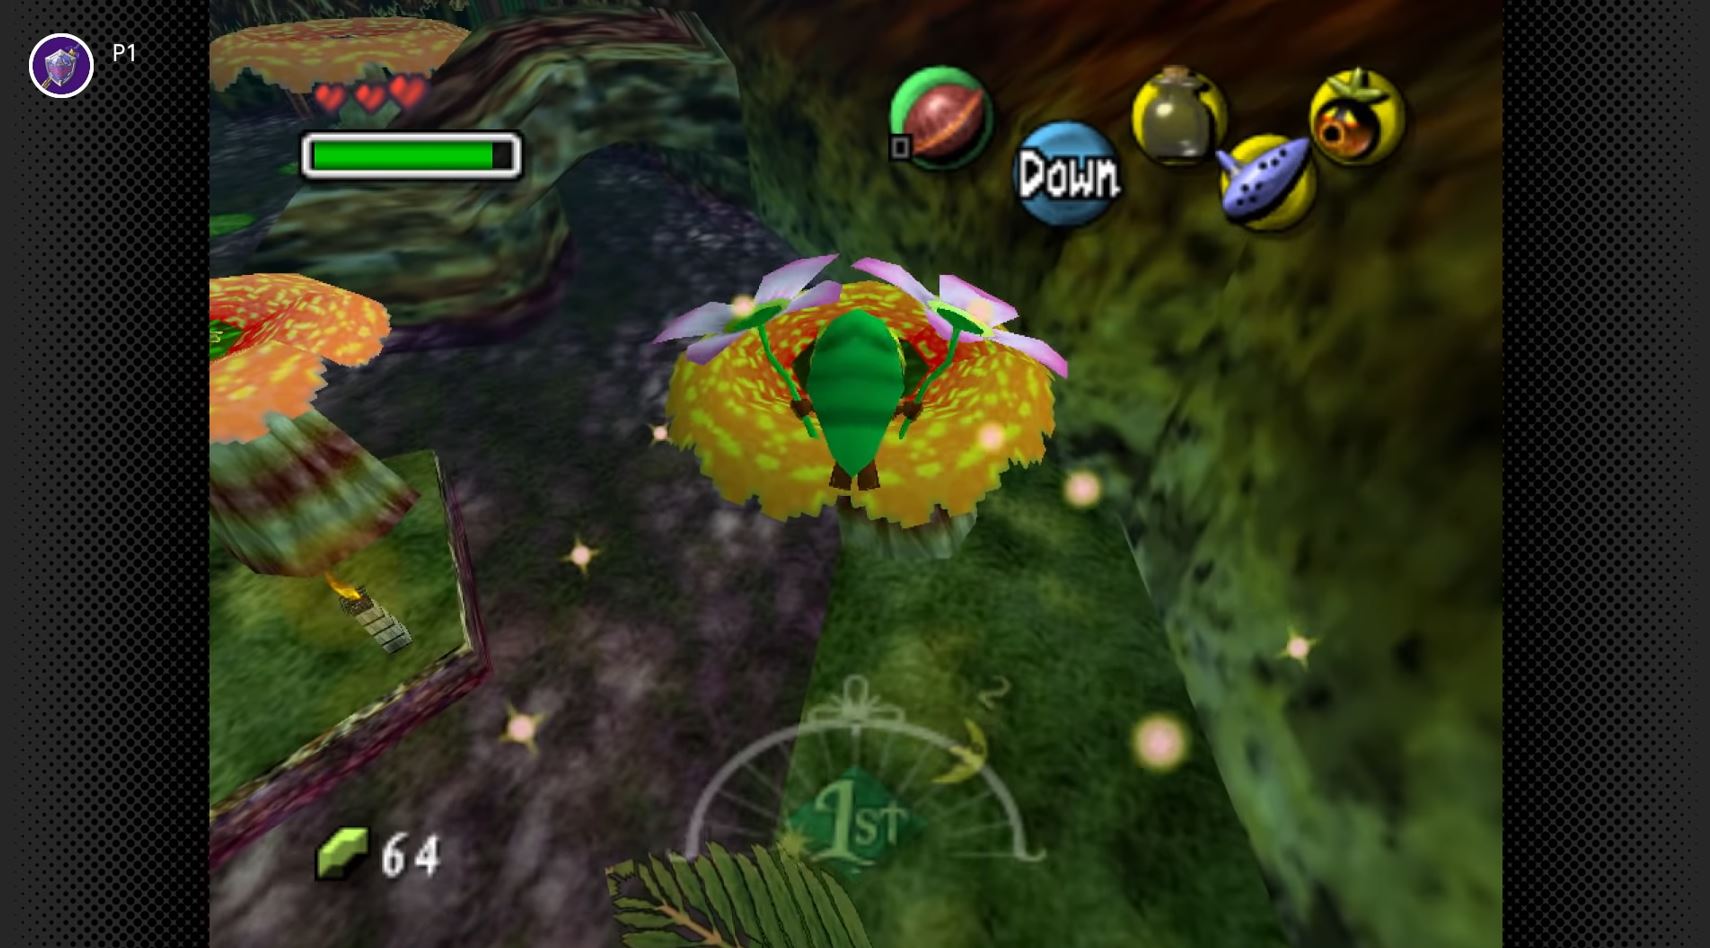 Ocarina of Time Vs. Majora's Mask: Which Is Better On Nintendo Switch